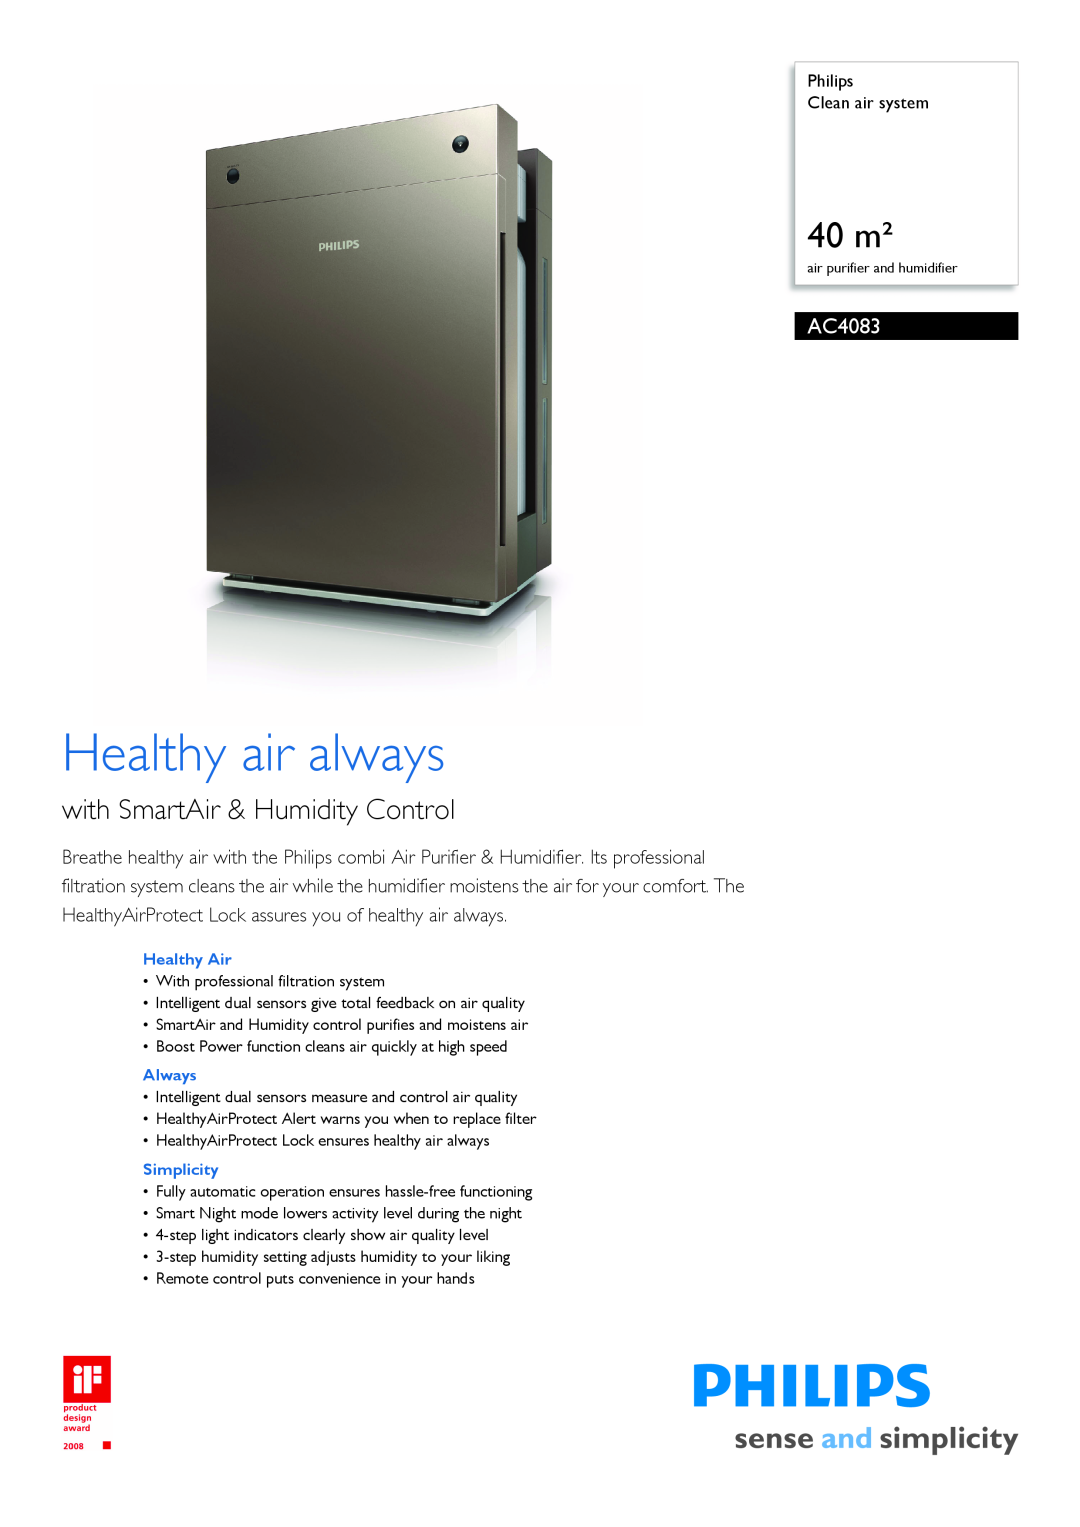 Philips AC4083/00 manual Philips Clean air system, Healthy Air, Always, Simplicity, Healthy air always, 40 m² 